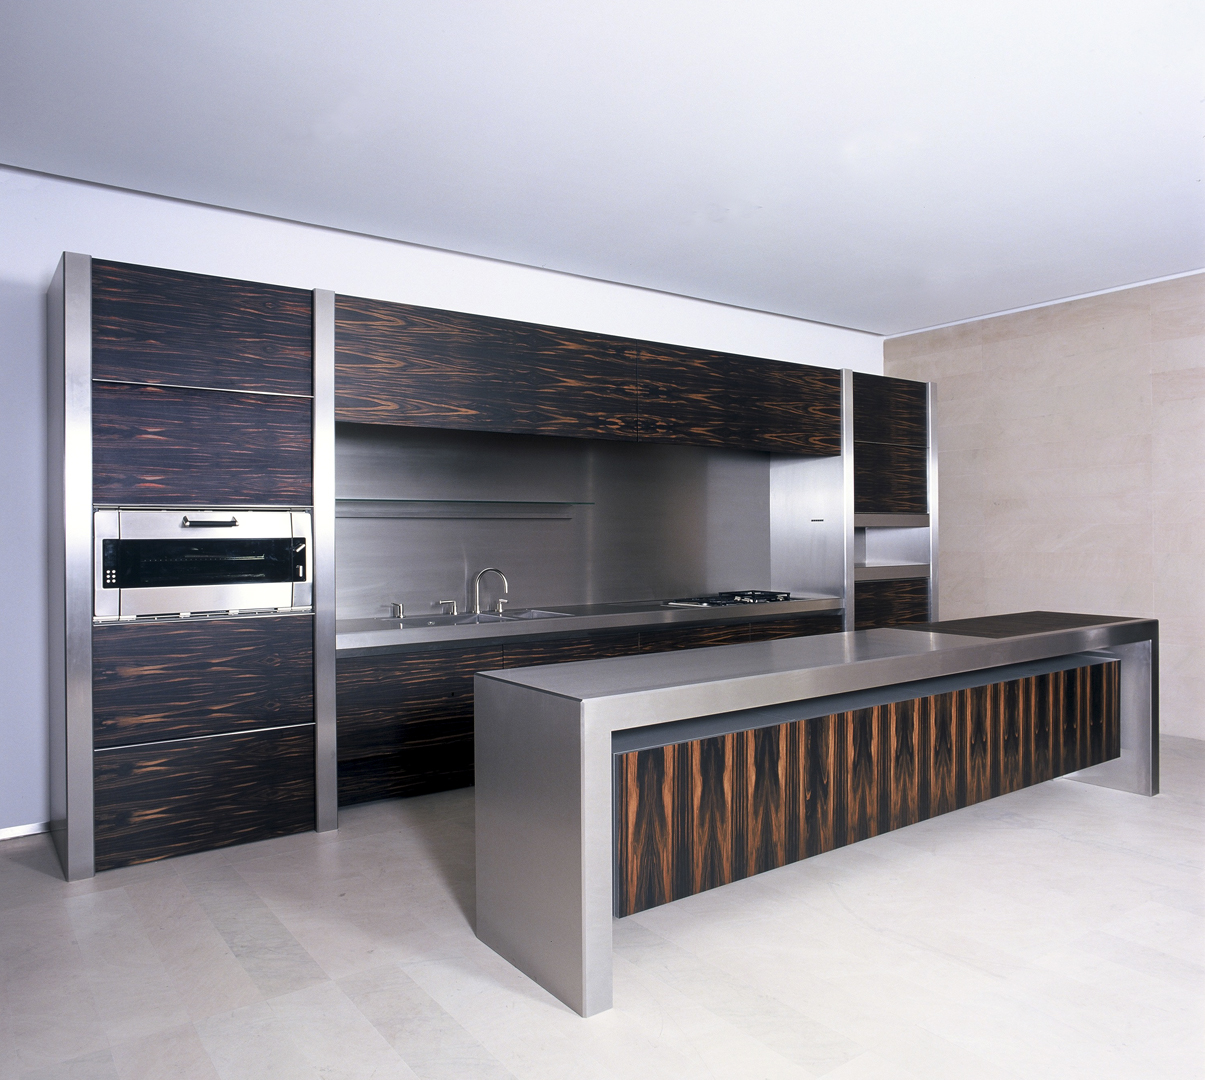 Strato_design_Non Plus Ultra_bespoke kitchen project in Milano_Ebony wood_mat stainless steel_001